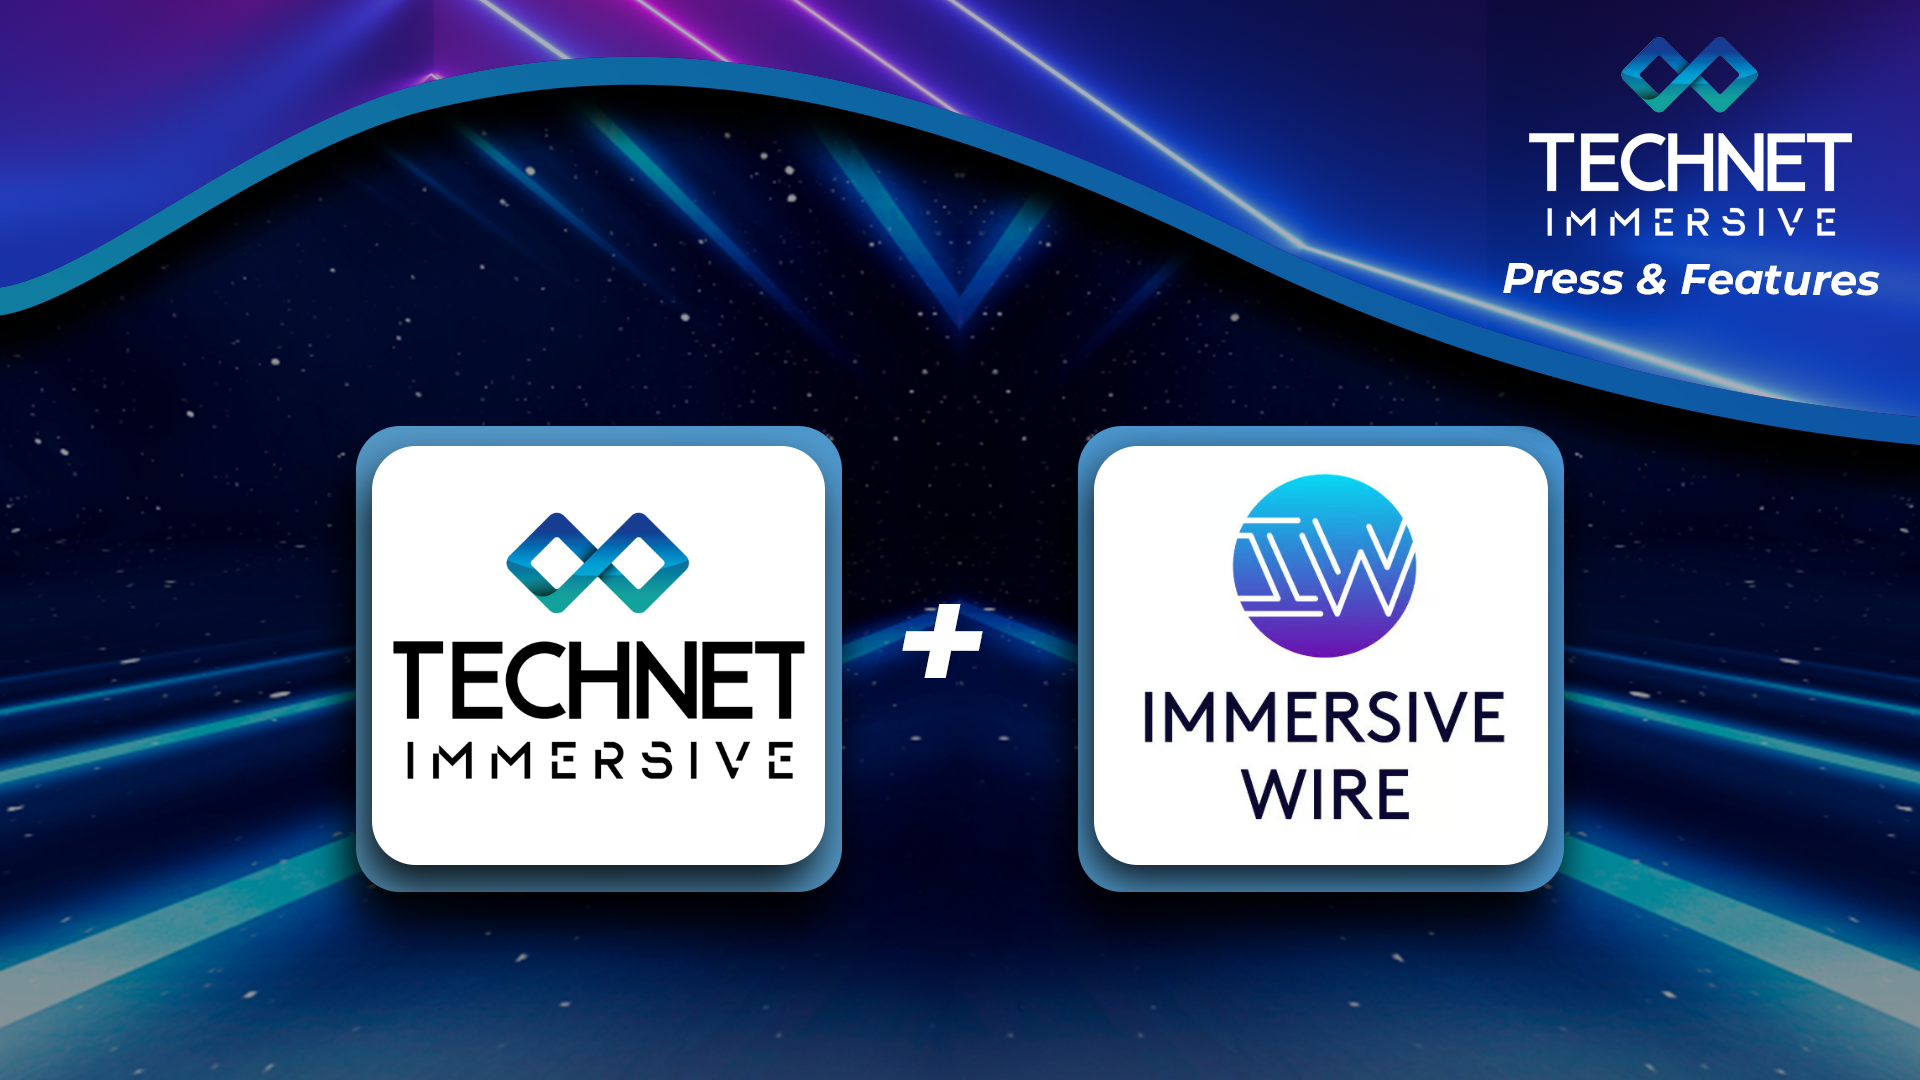 The Immersive Wire feature and collaboration